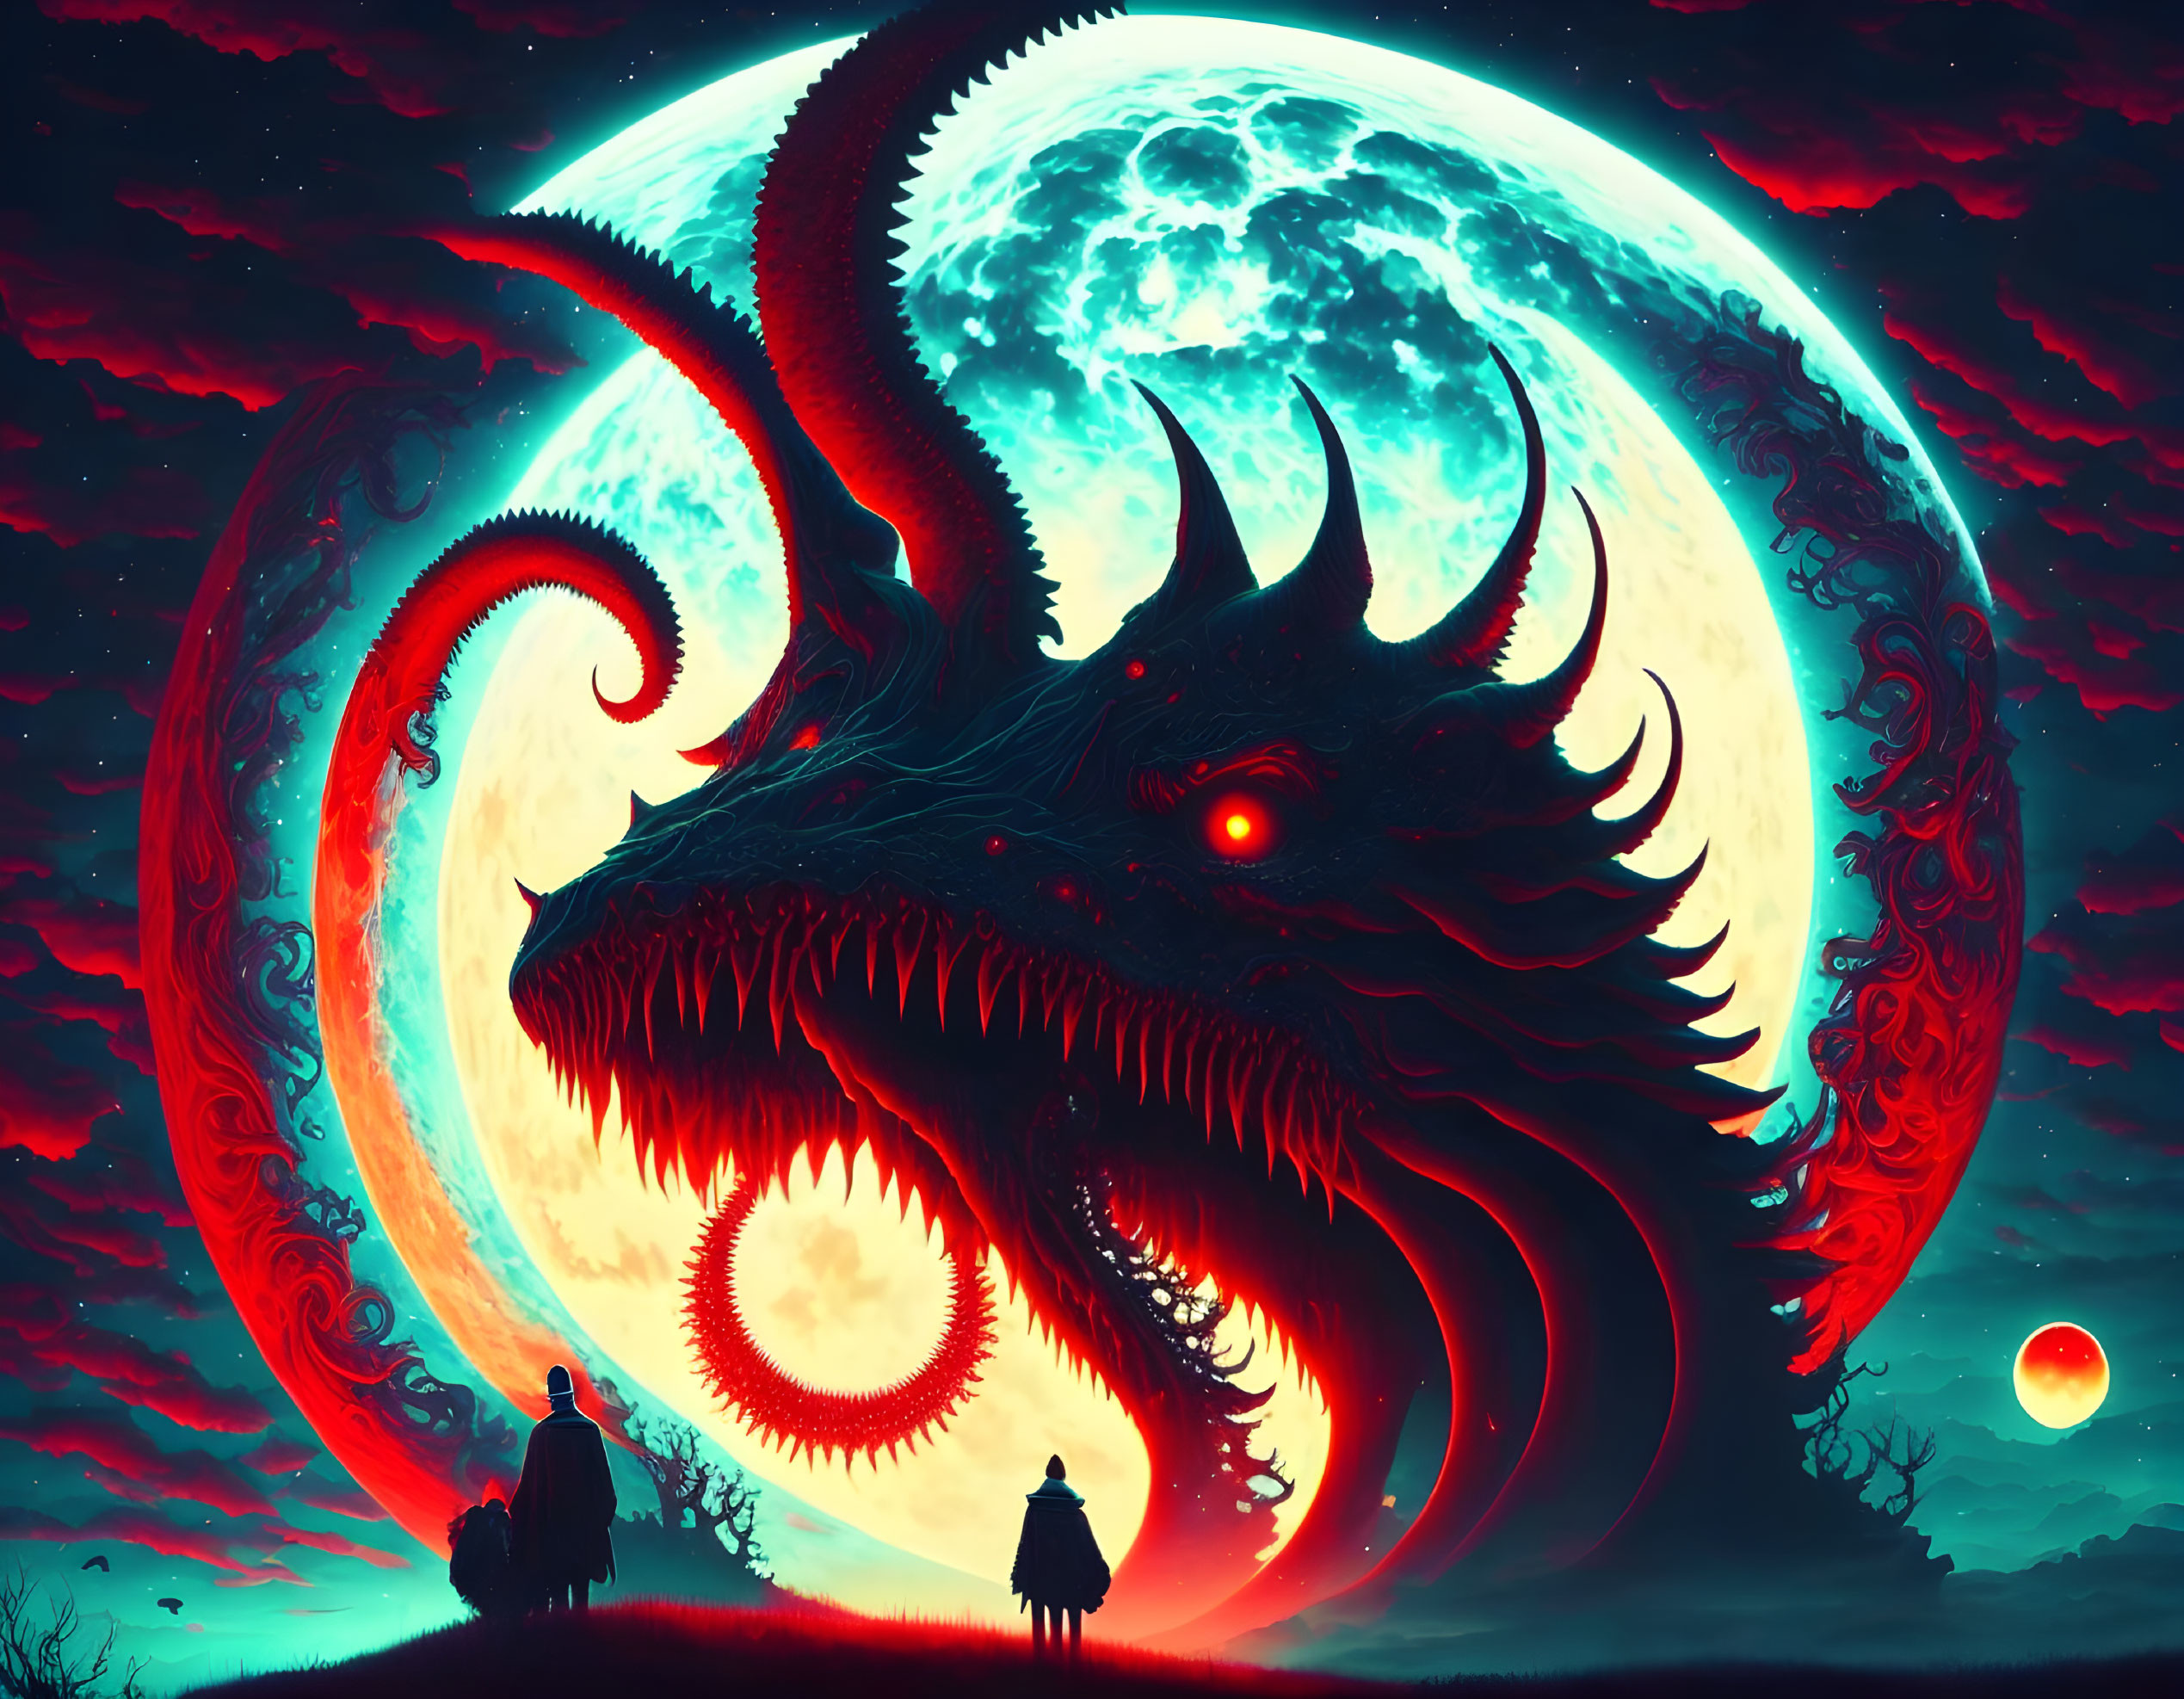 Giant dragon overlooking silhouetted figures under a red and blue moon